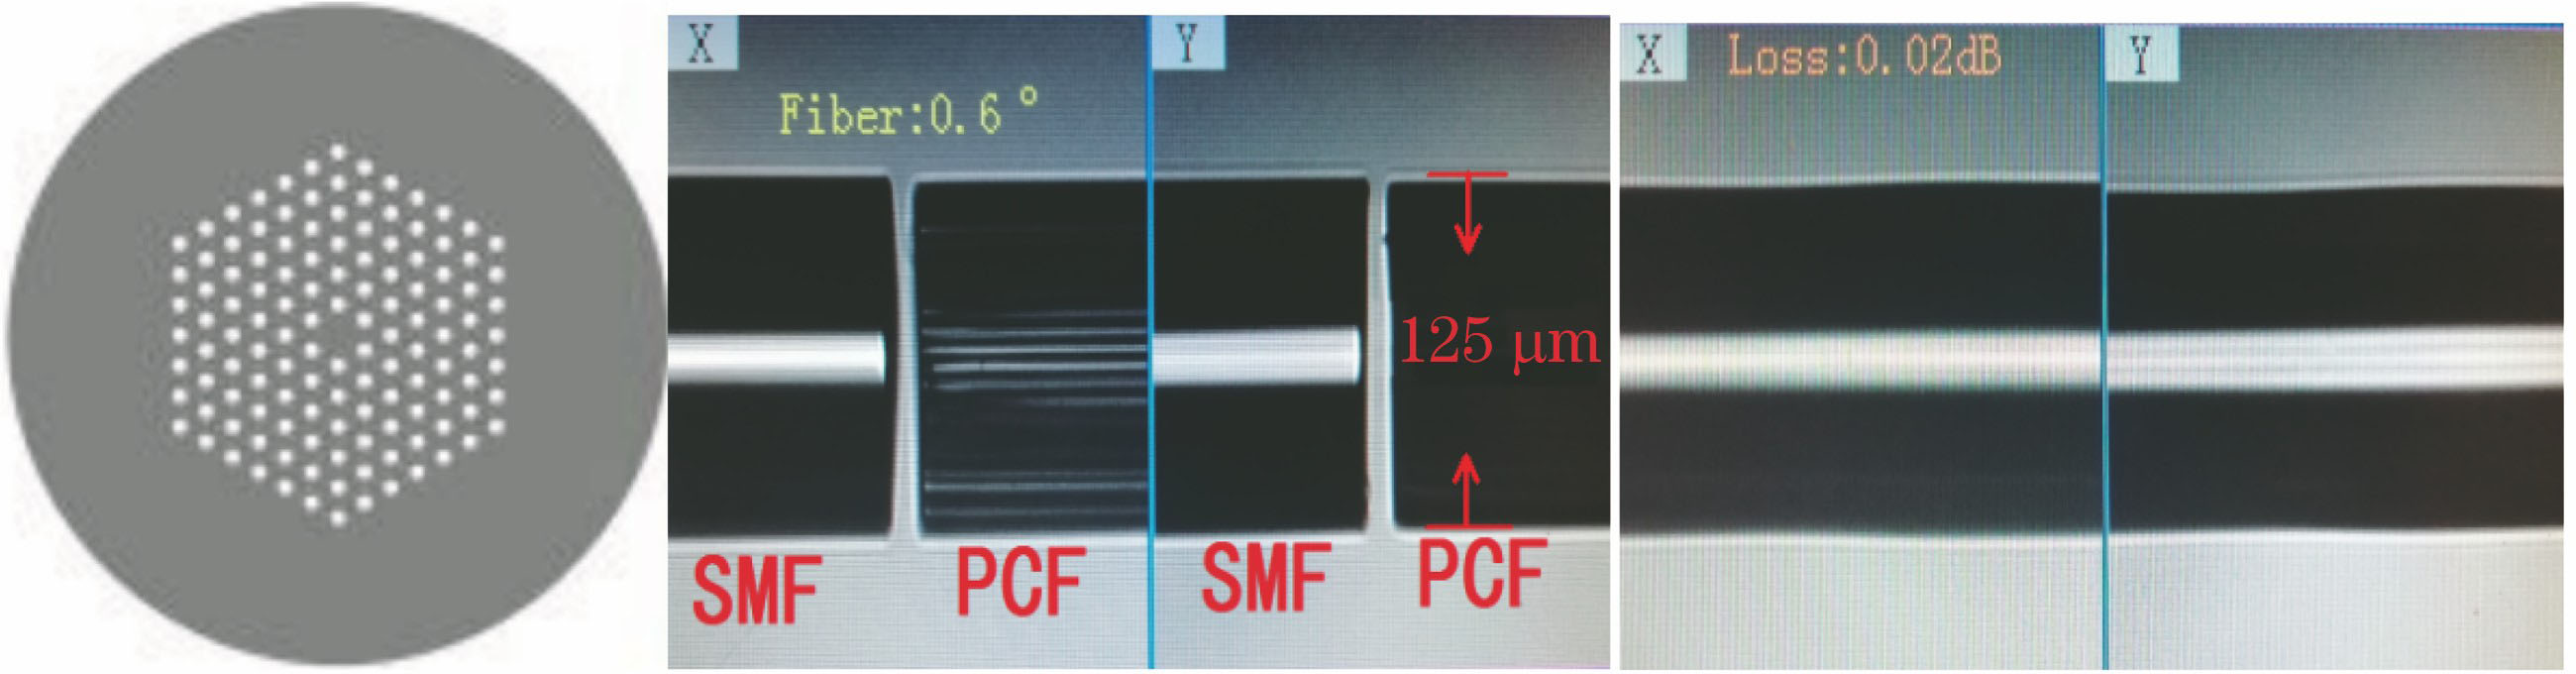 Microimage of SMF-PCF sensing region. (a) Cross section of PCF; (b) Before welding of SMF and PCF; (c) after welding of SMF and PCF